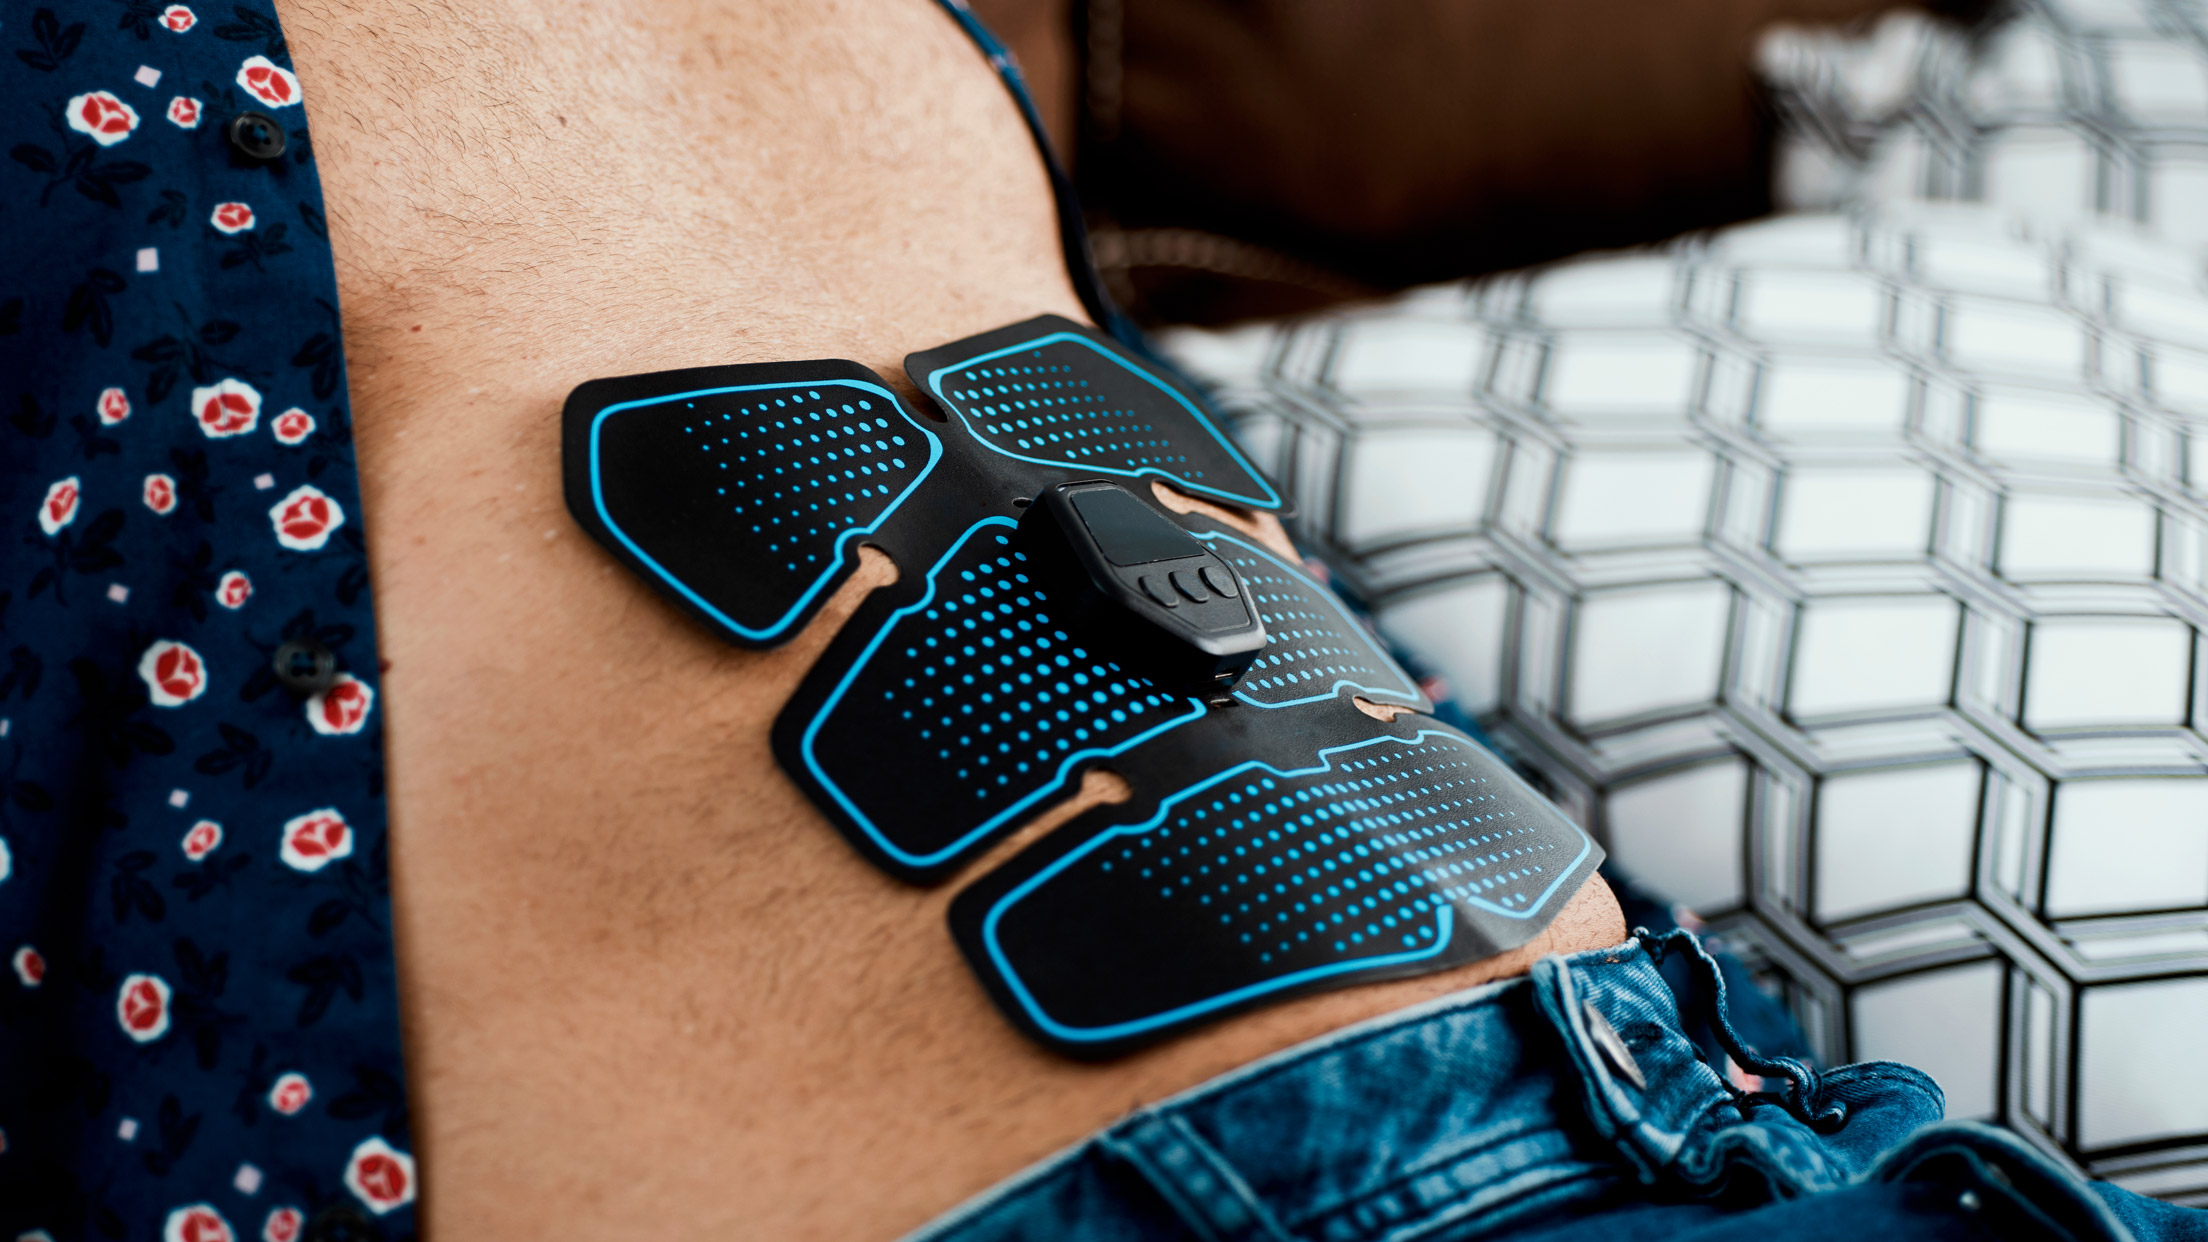 Electric Muscle Stimulation Review - 'I Tried Electric Muscle